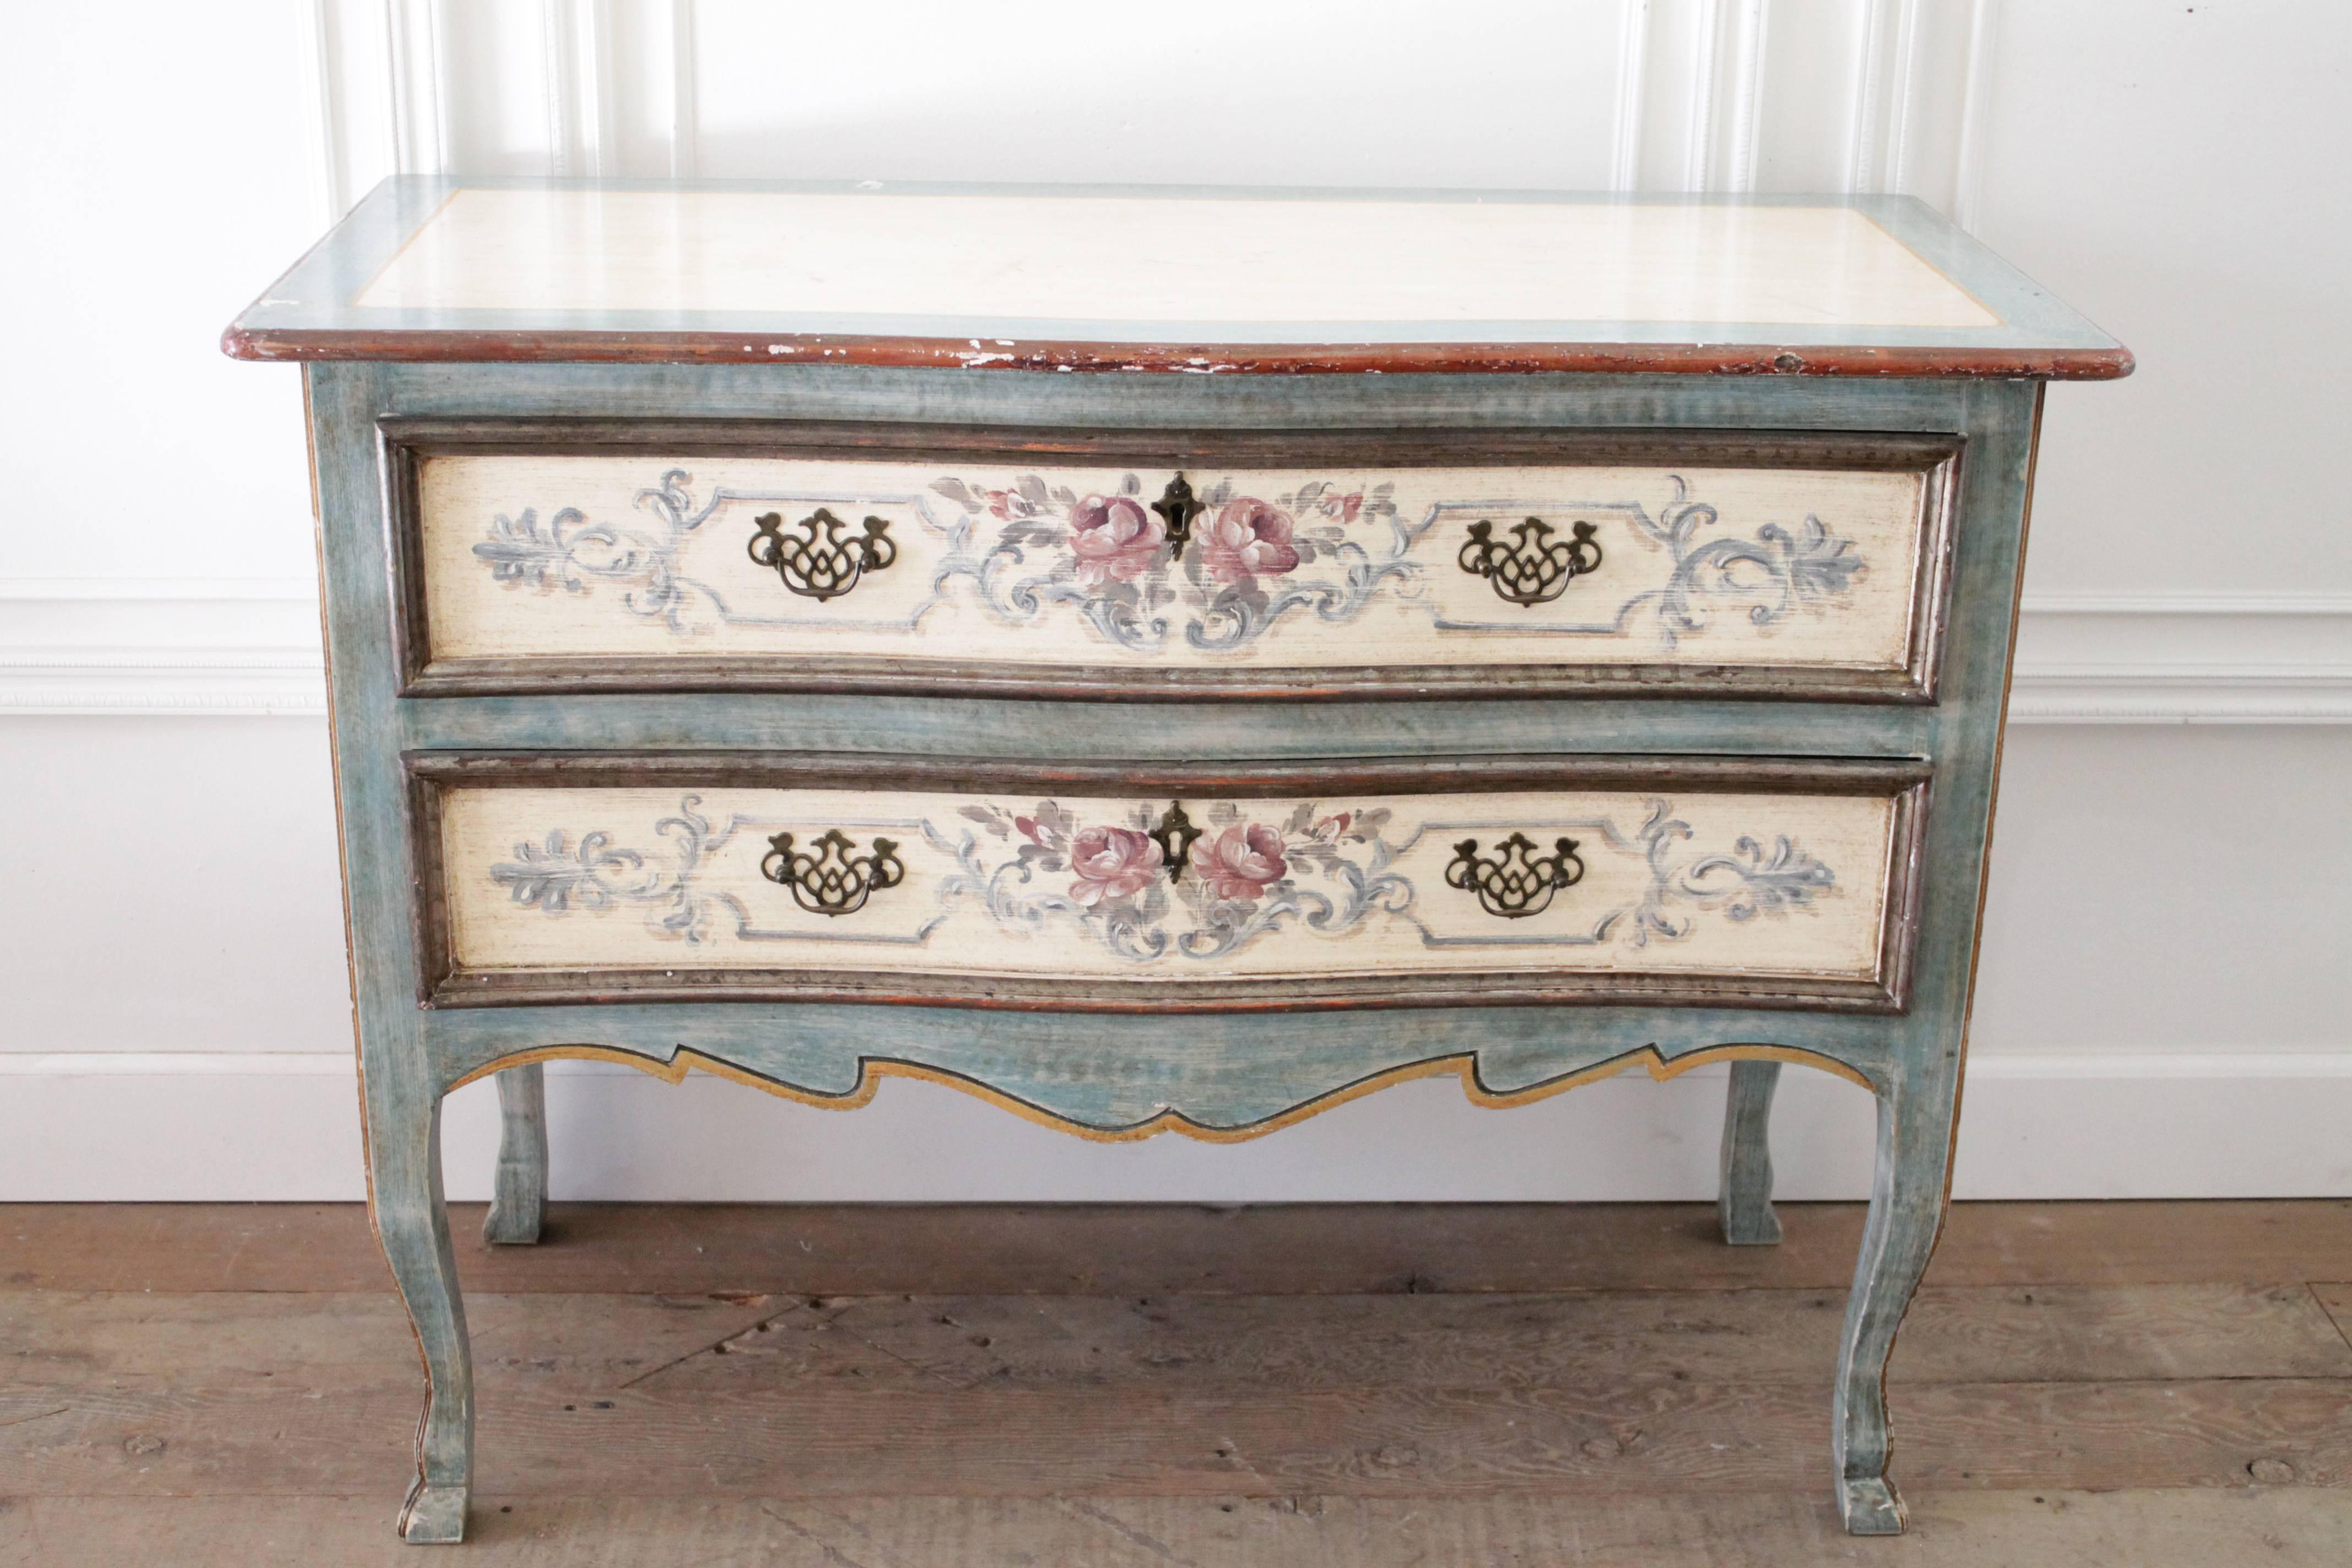 Lovely two-drawer Italian commode painted in a soft pale aqua, and cream color. Hand-painted floral details on the drawers, with iron pulls.
Has an aged distressed paint patina, with chips or scuff on edges. Legs are sturdy, drawers open and close